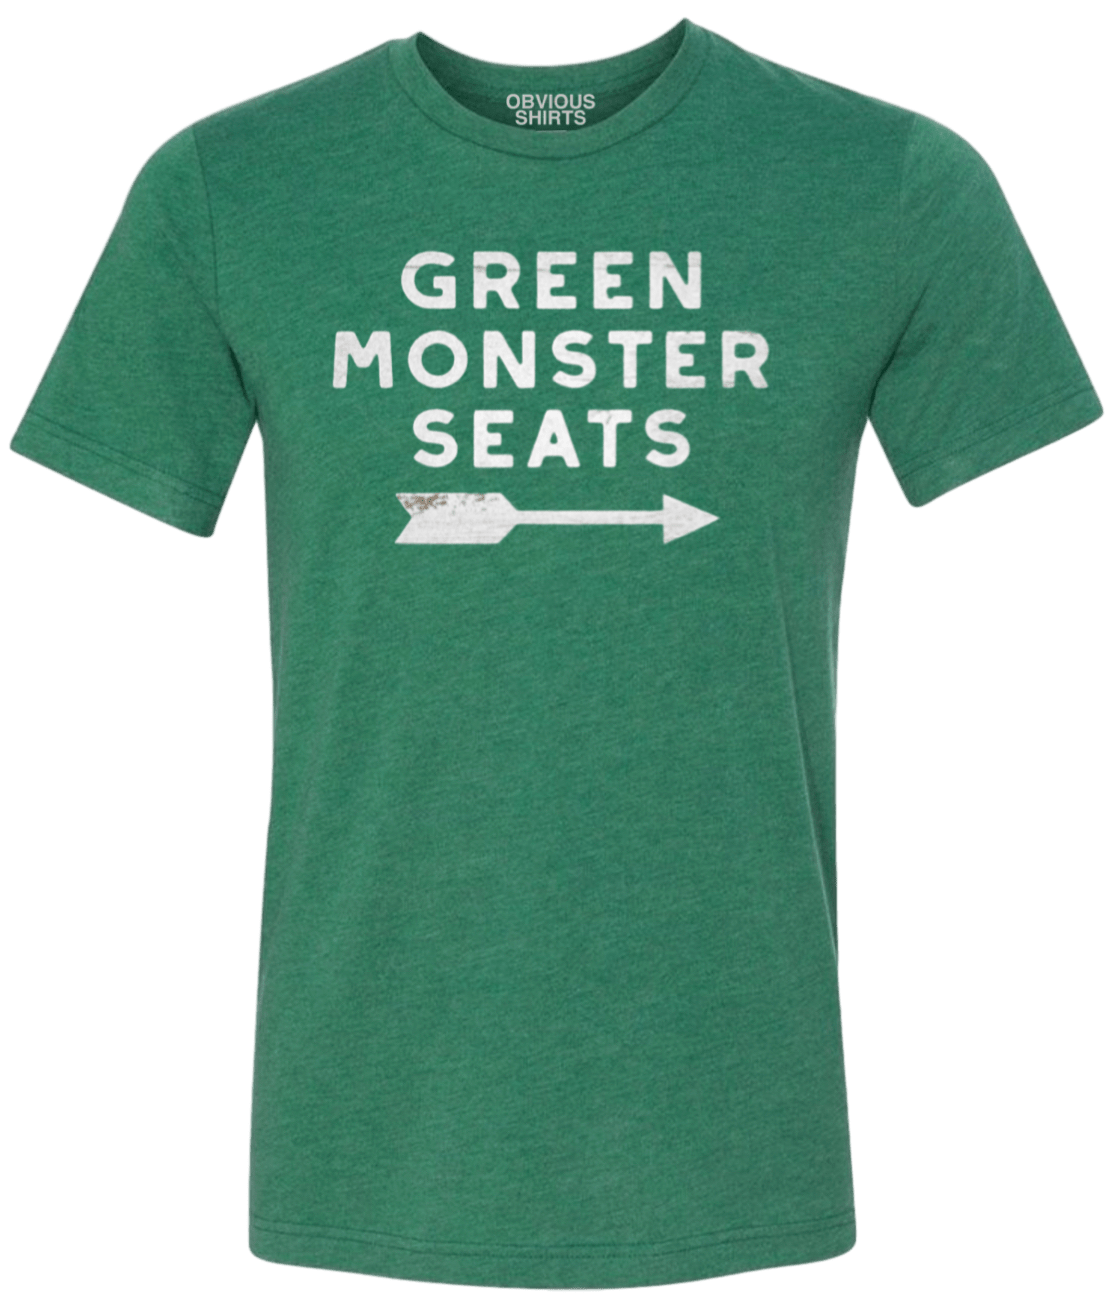 GREEN MONSTER SEATS. - OBVIOUS SHIRTS